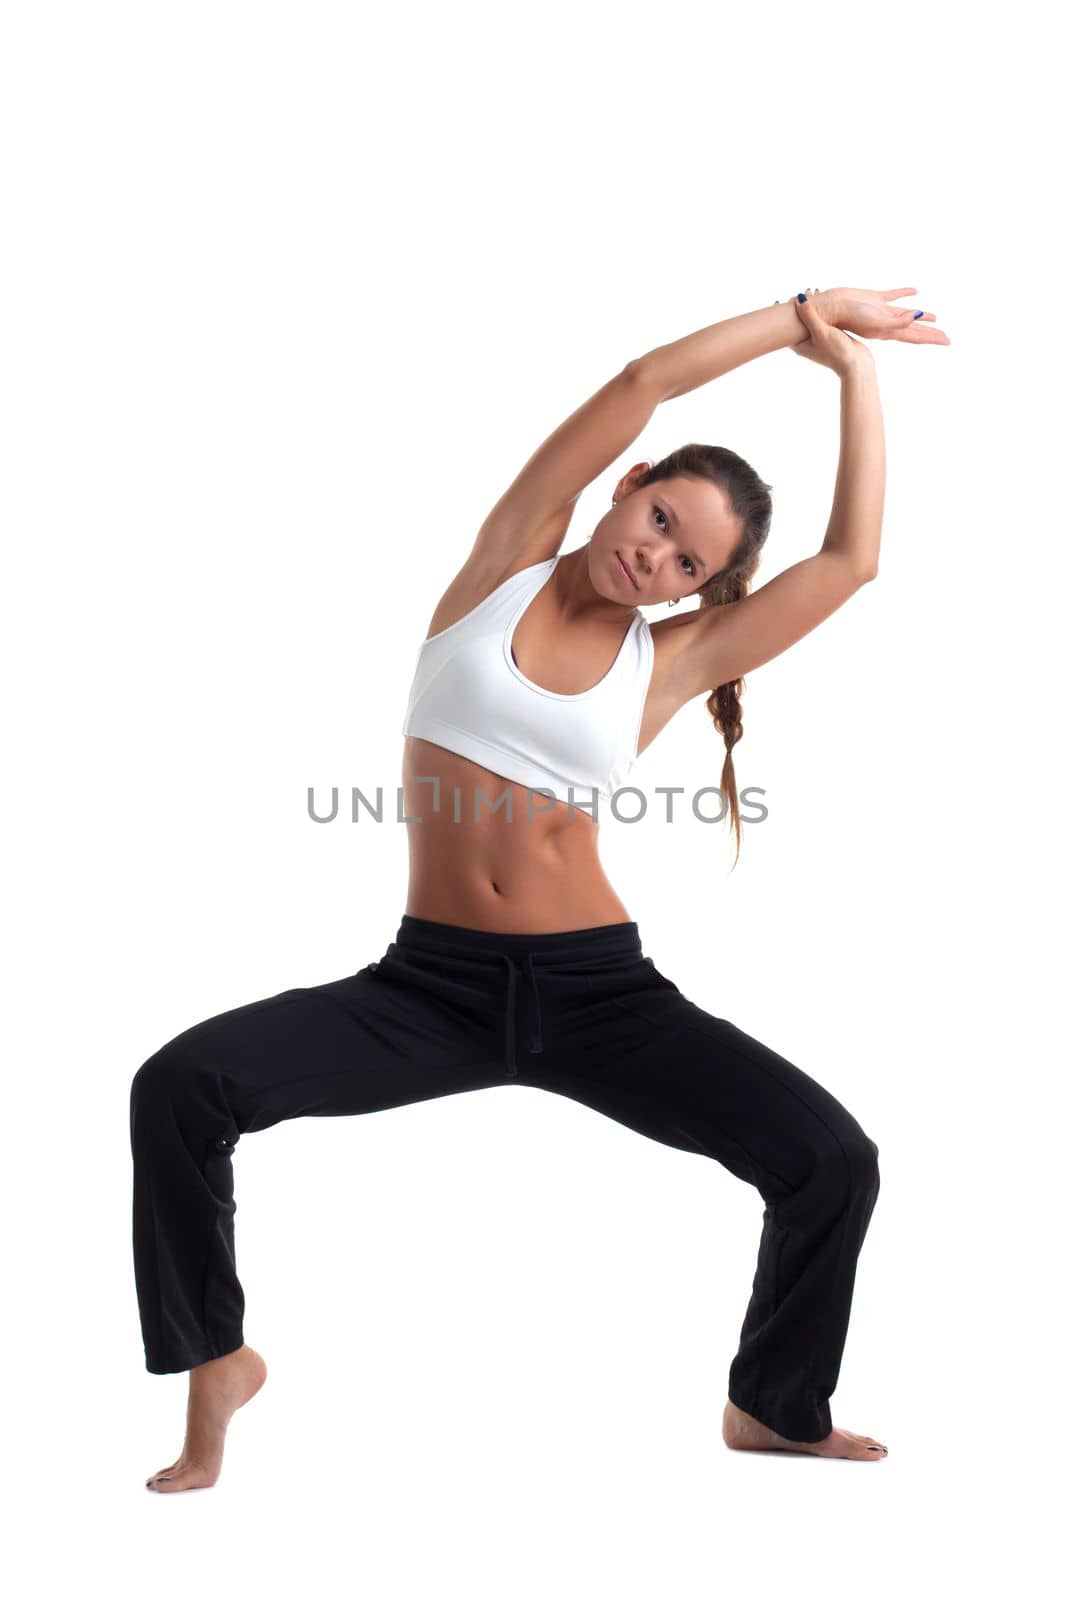 Young woman posing in fitness costume by rivertime